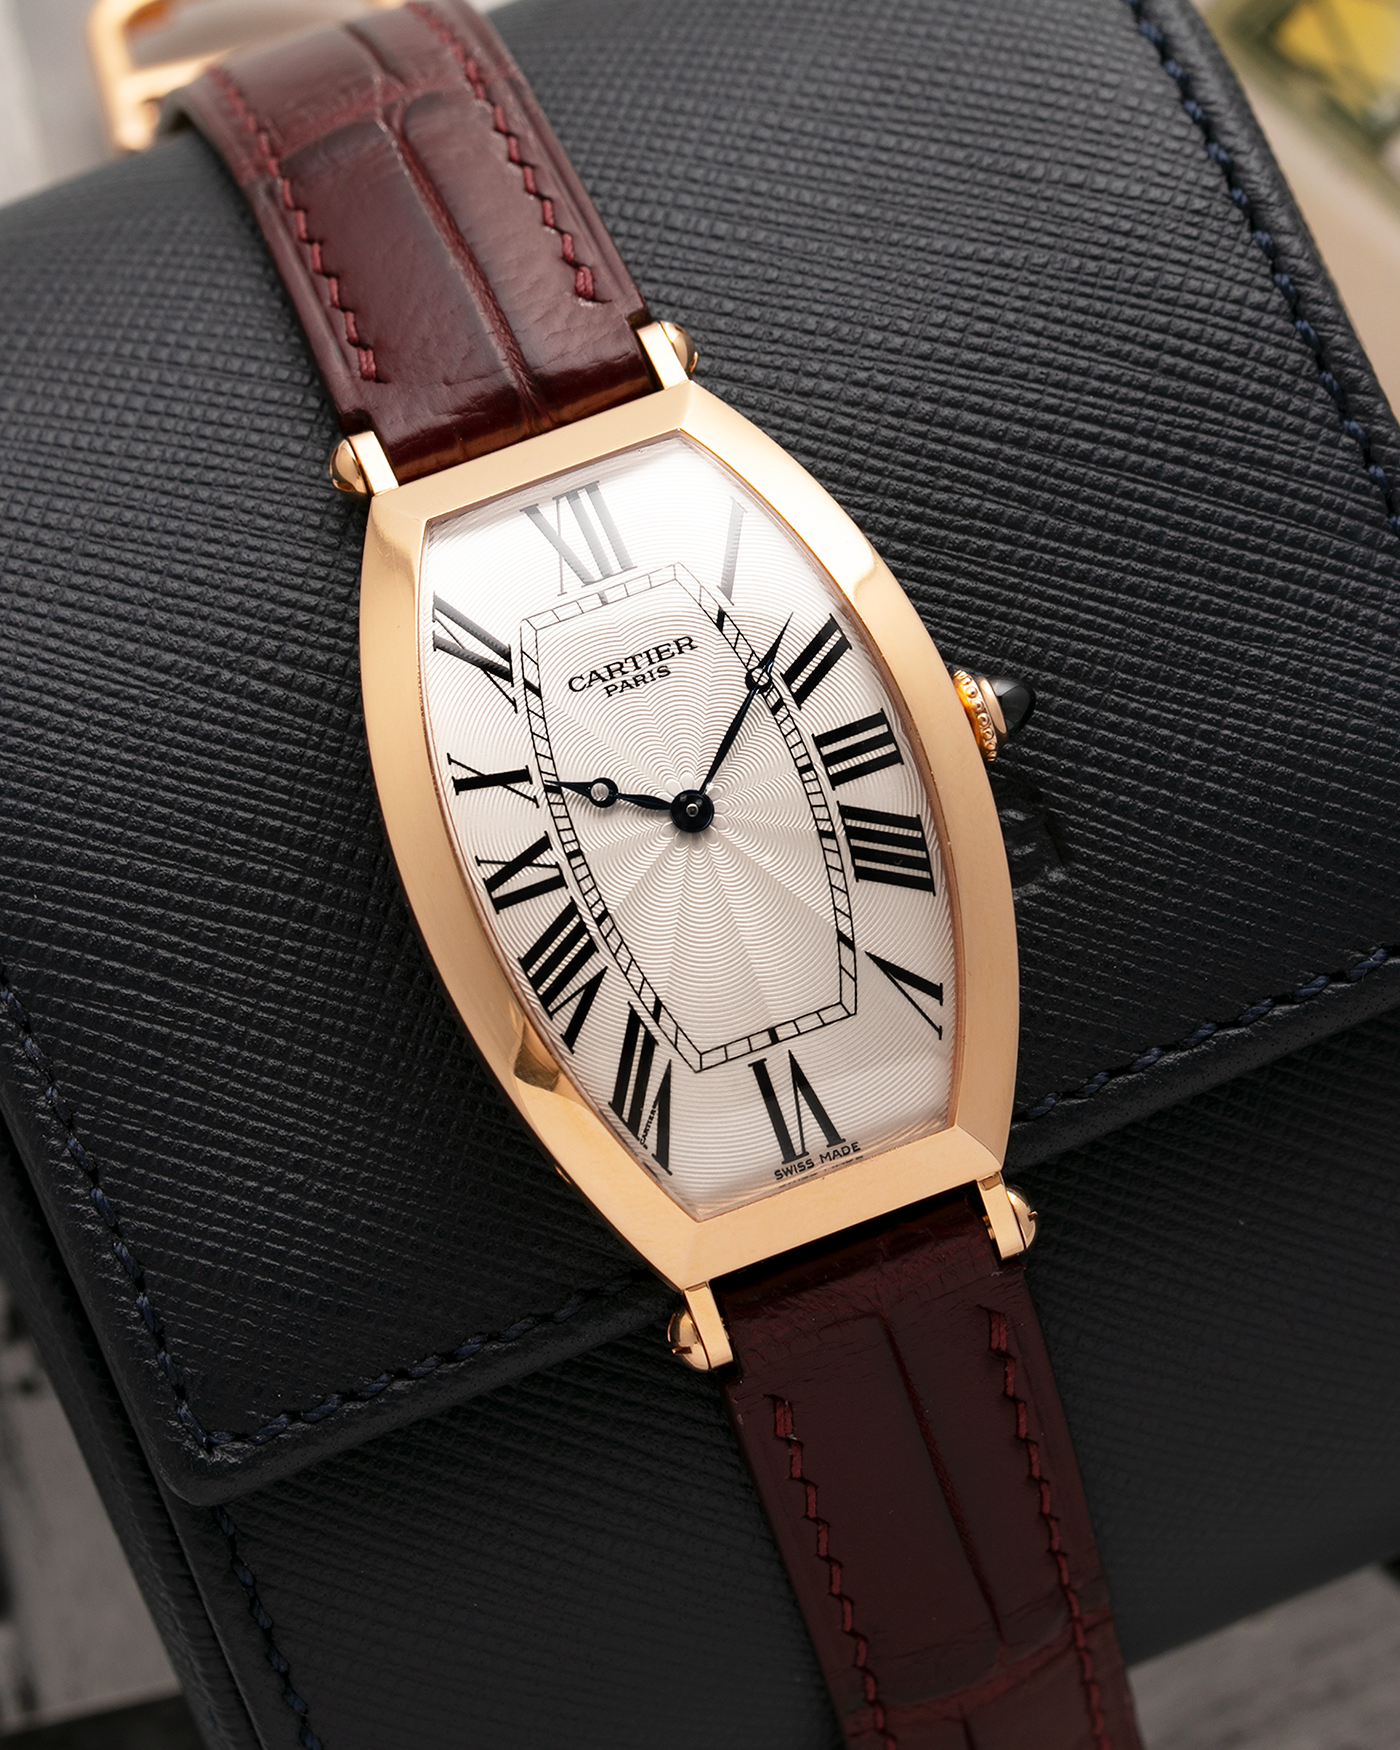 Brand: Cartier Year: 2006 Model: CPCP Collection Prive Tonneau XL Reference: 2802H Material: 18k Rose Gold Movement: Can 9790MC Case Diameter: 43.4mmX29.4mm Strap: Cartier Oxblood Alligator Strap with 18k Rose Gold Deployant Clasp